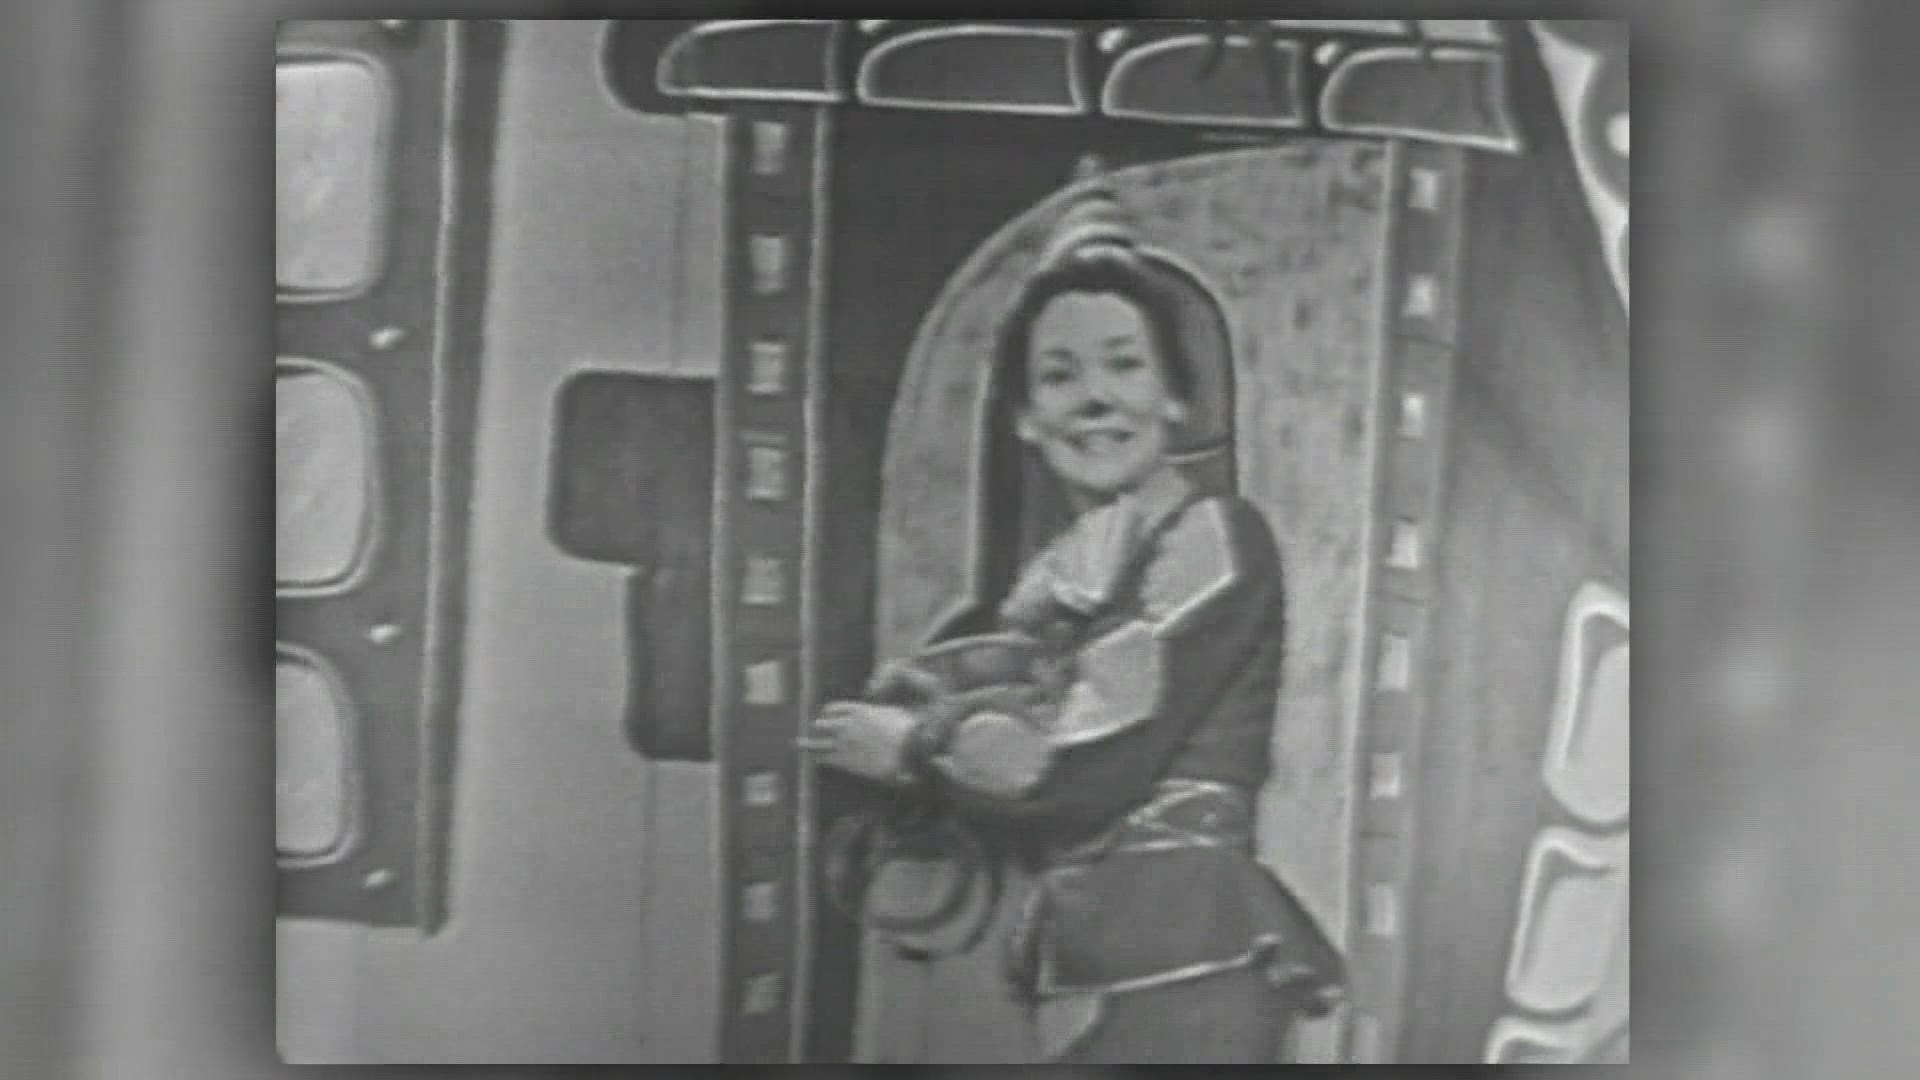 Ruth Prins, otherwise known as Wunda Wunda, hosted a popular children's show from 1952-1972.